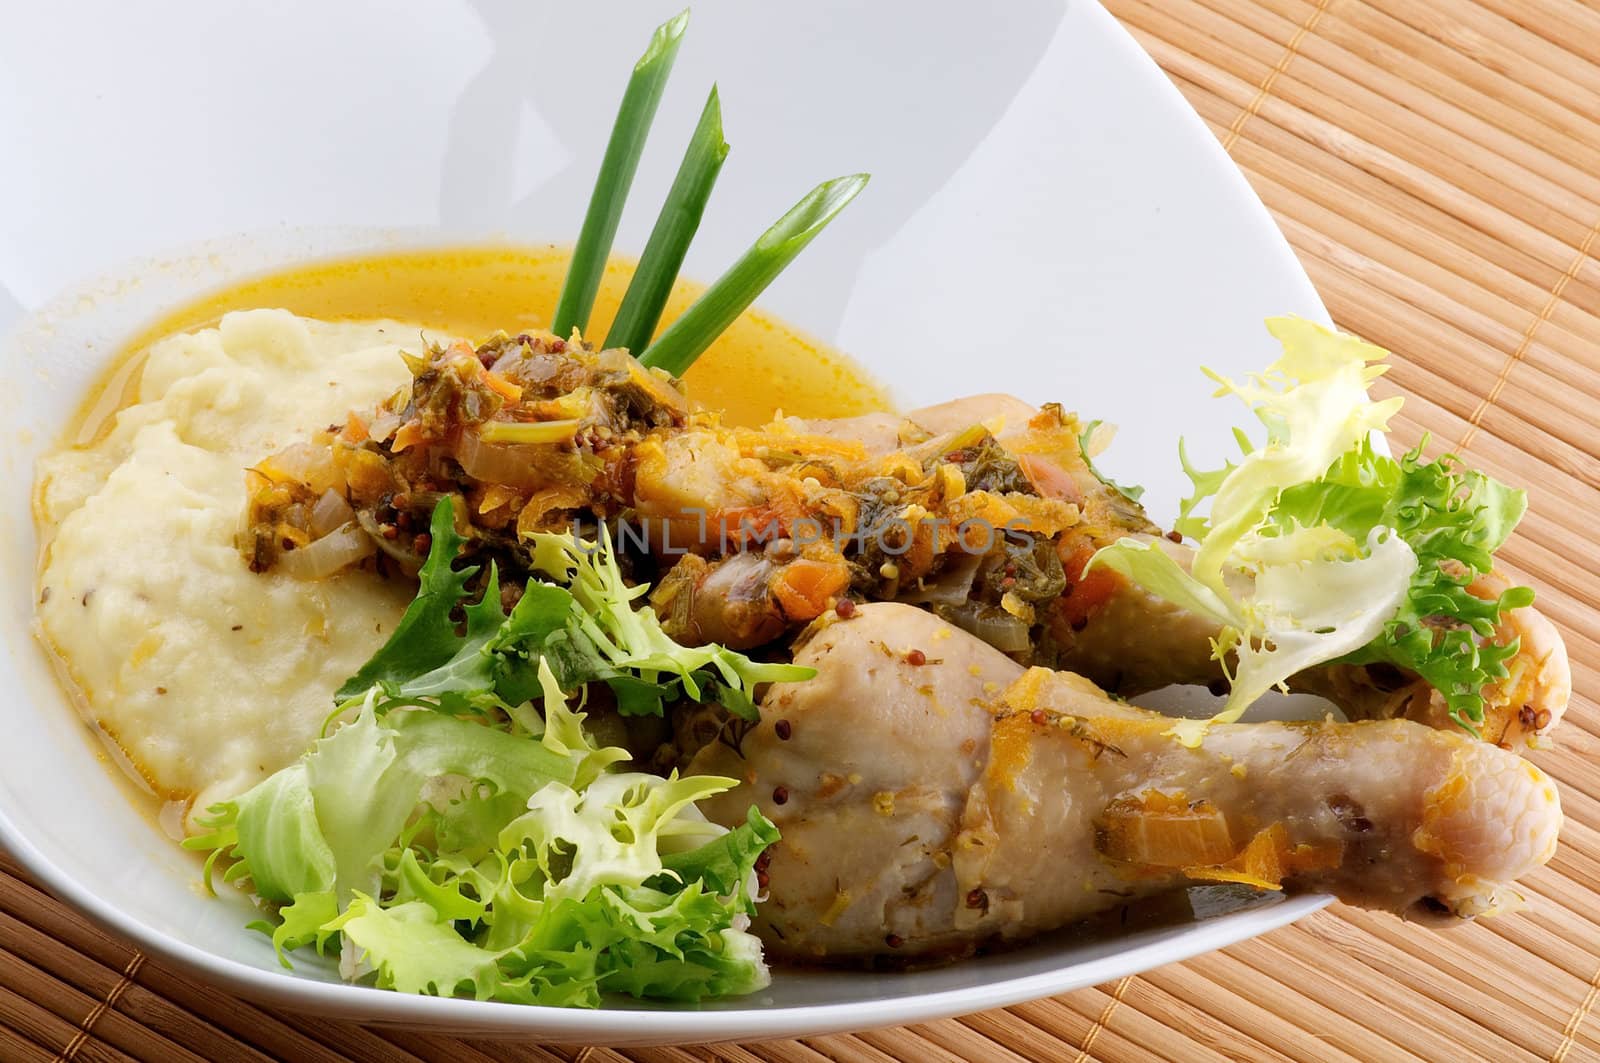 Roasted chicken legs with mashed potatoes, vegetables saute and greens by zhekos